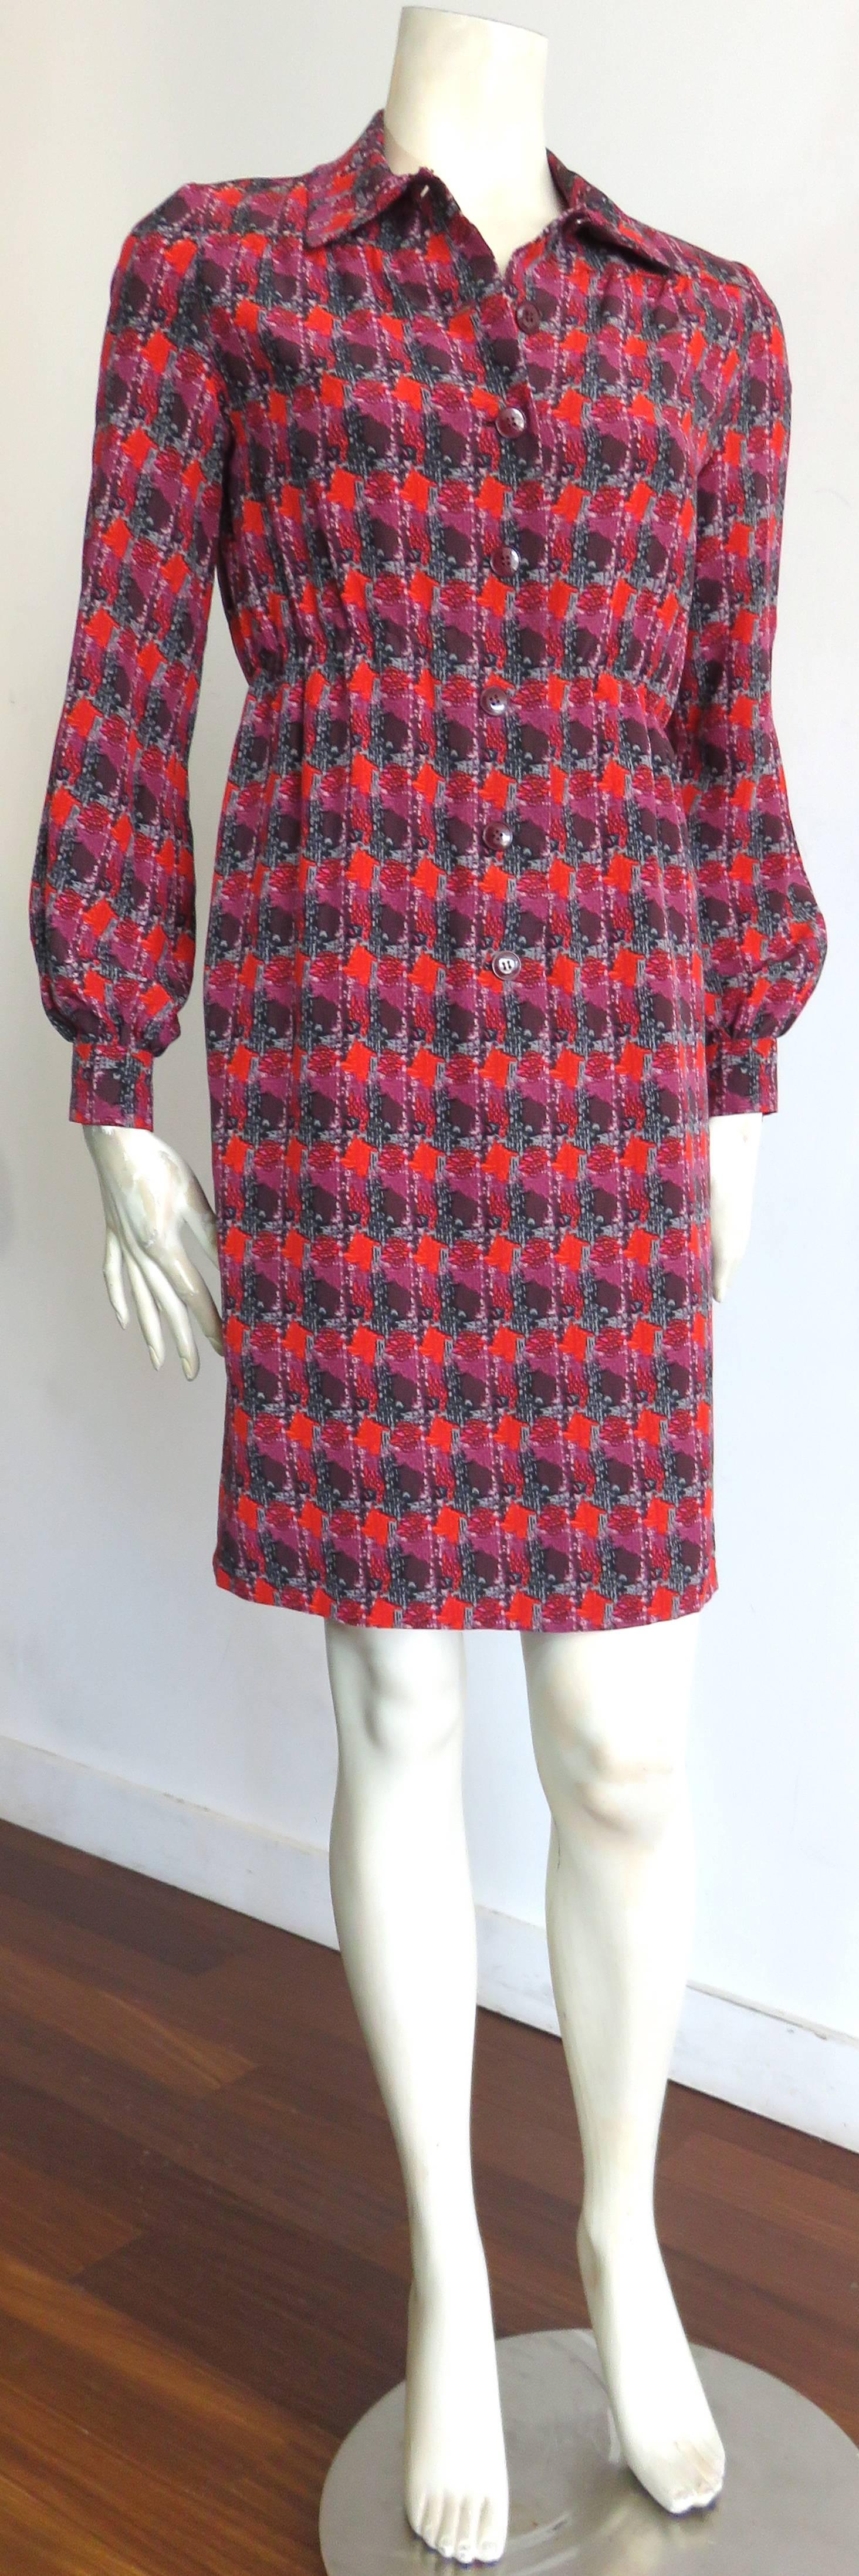 1970's YVES SAINT LAURENT Printed silk dress In Excellent Condition For Sale In Newport Beach, CA